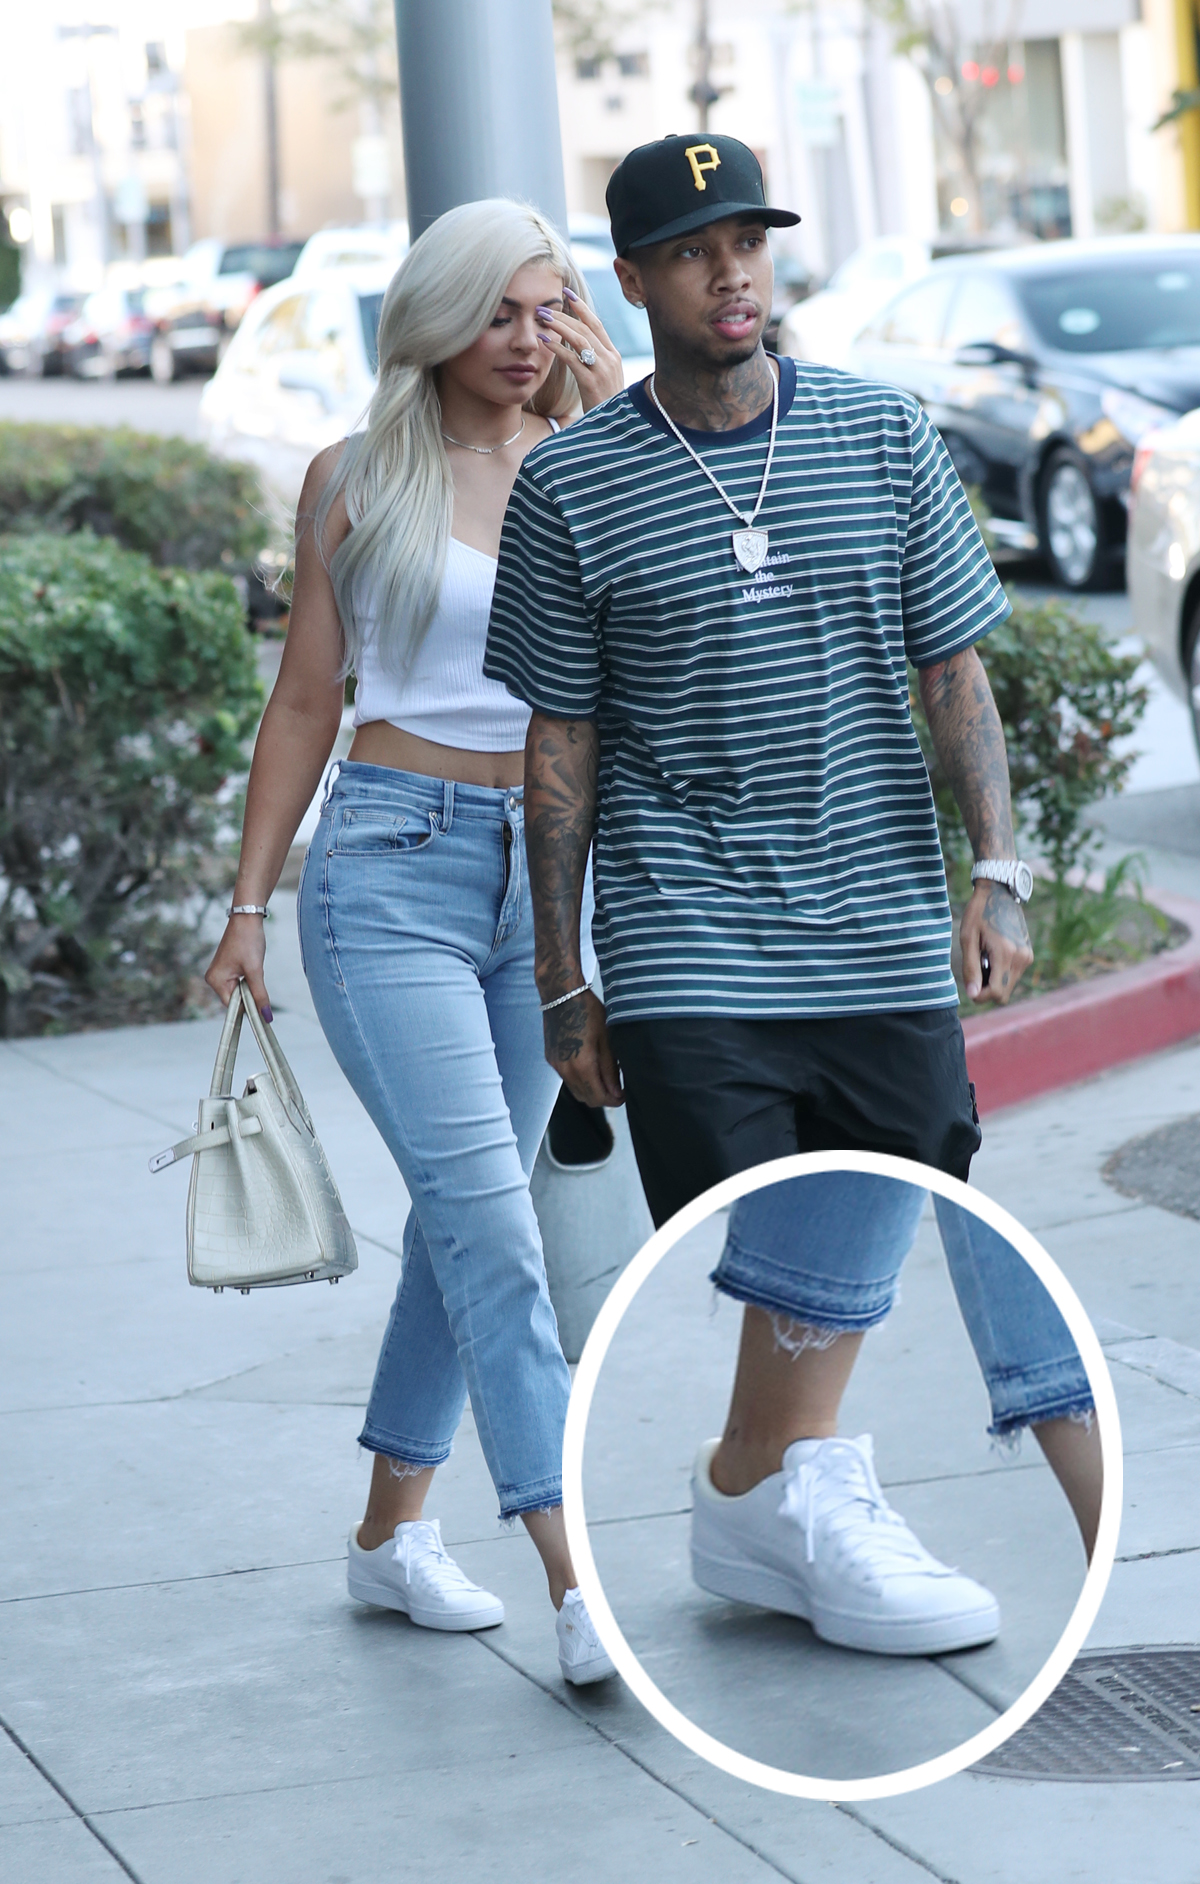 Kylie Jenner had Tyga tattoo, but covered it up